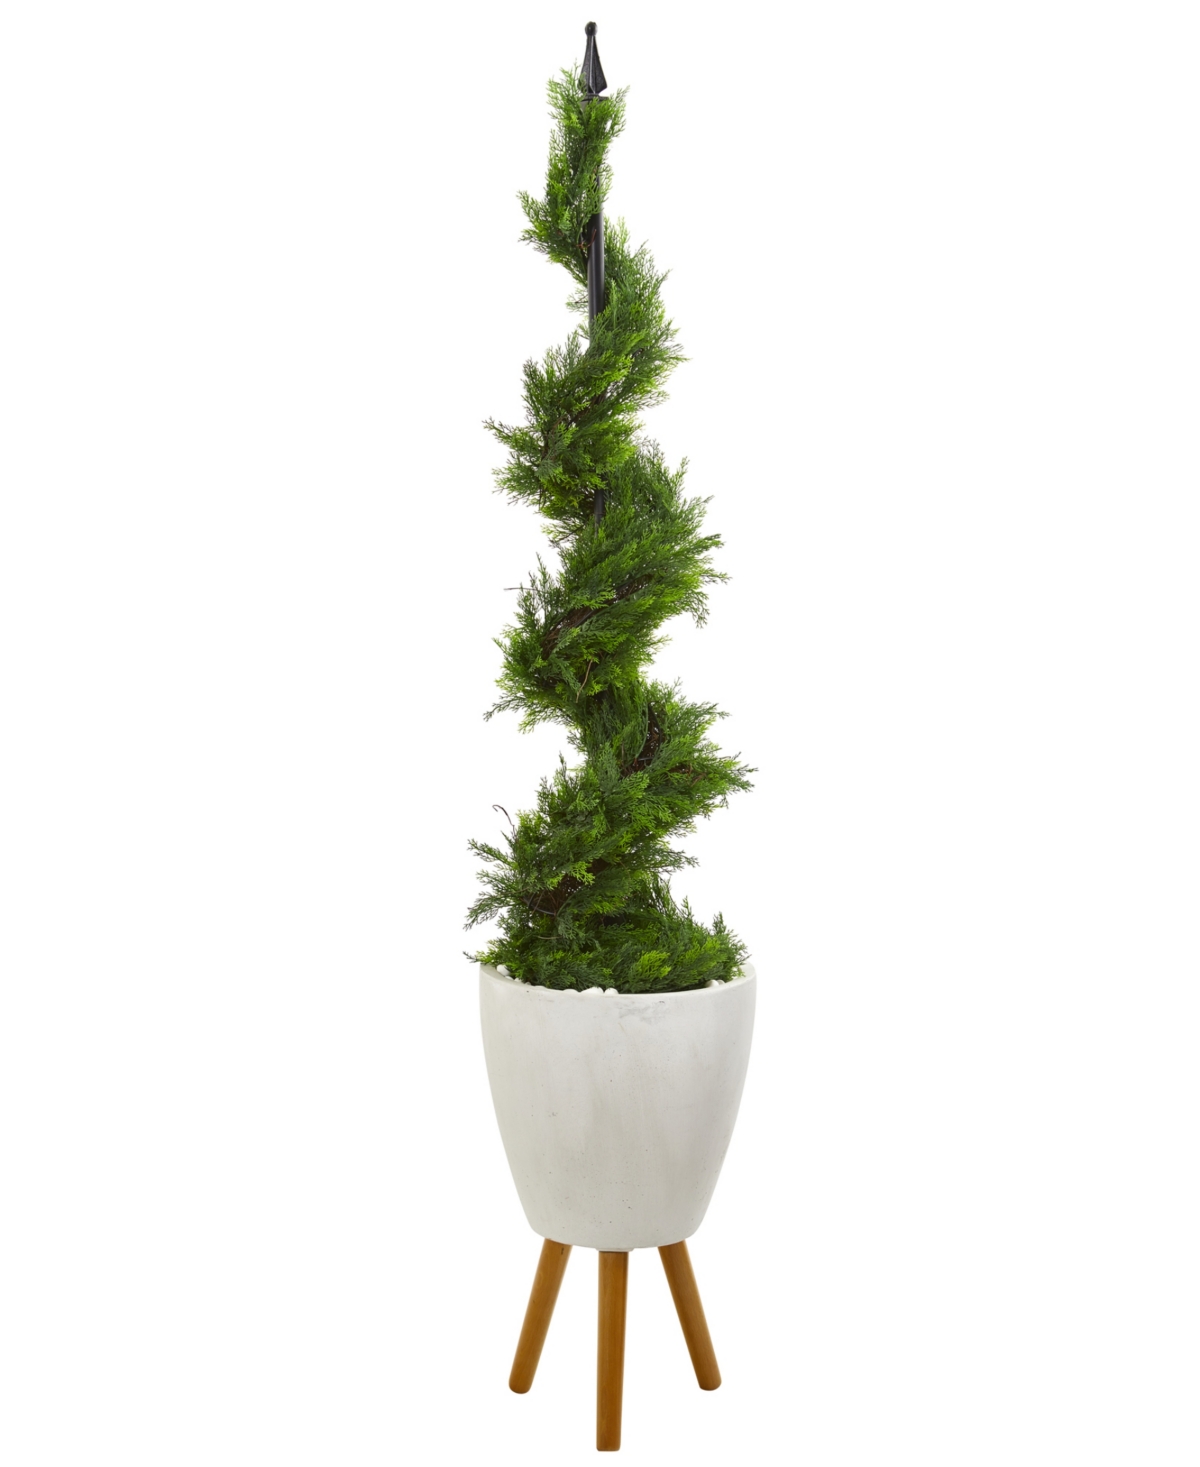 6ft. Cypress Artificial Spiral Topiary Tree in White Planter with Stand - Green